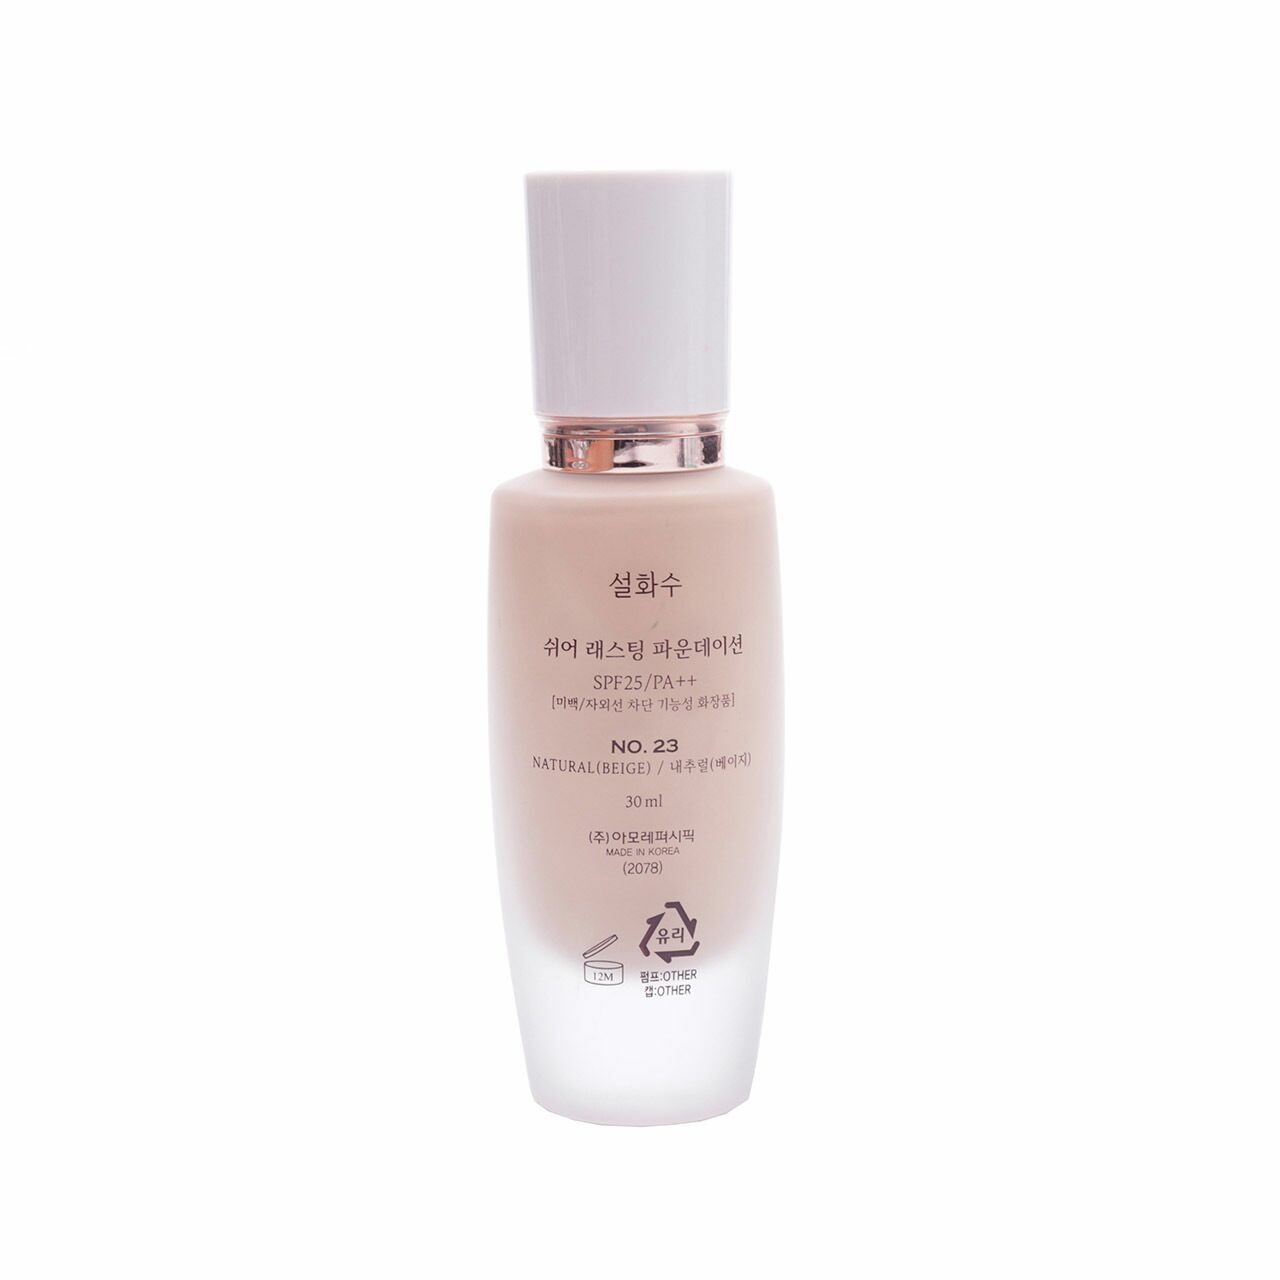 Sulwhasoo Sheer Lasting Foundation SPF 25/PA++ No.23 Natural Beige Faces